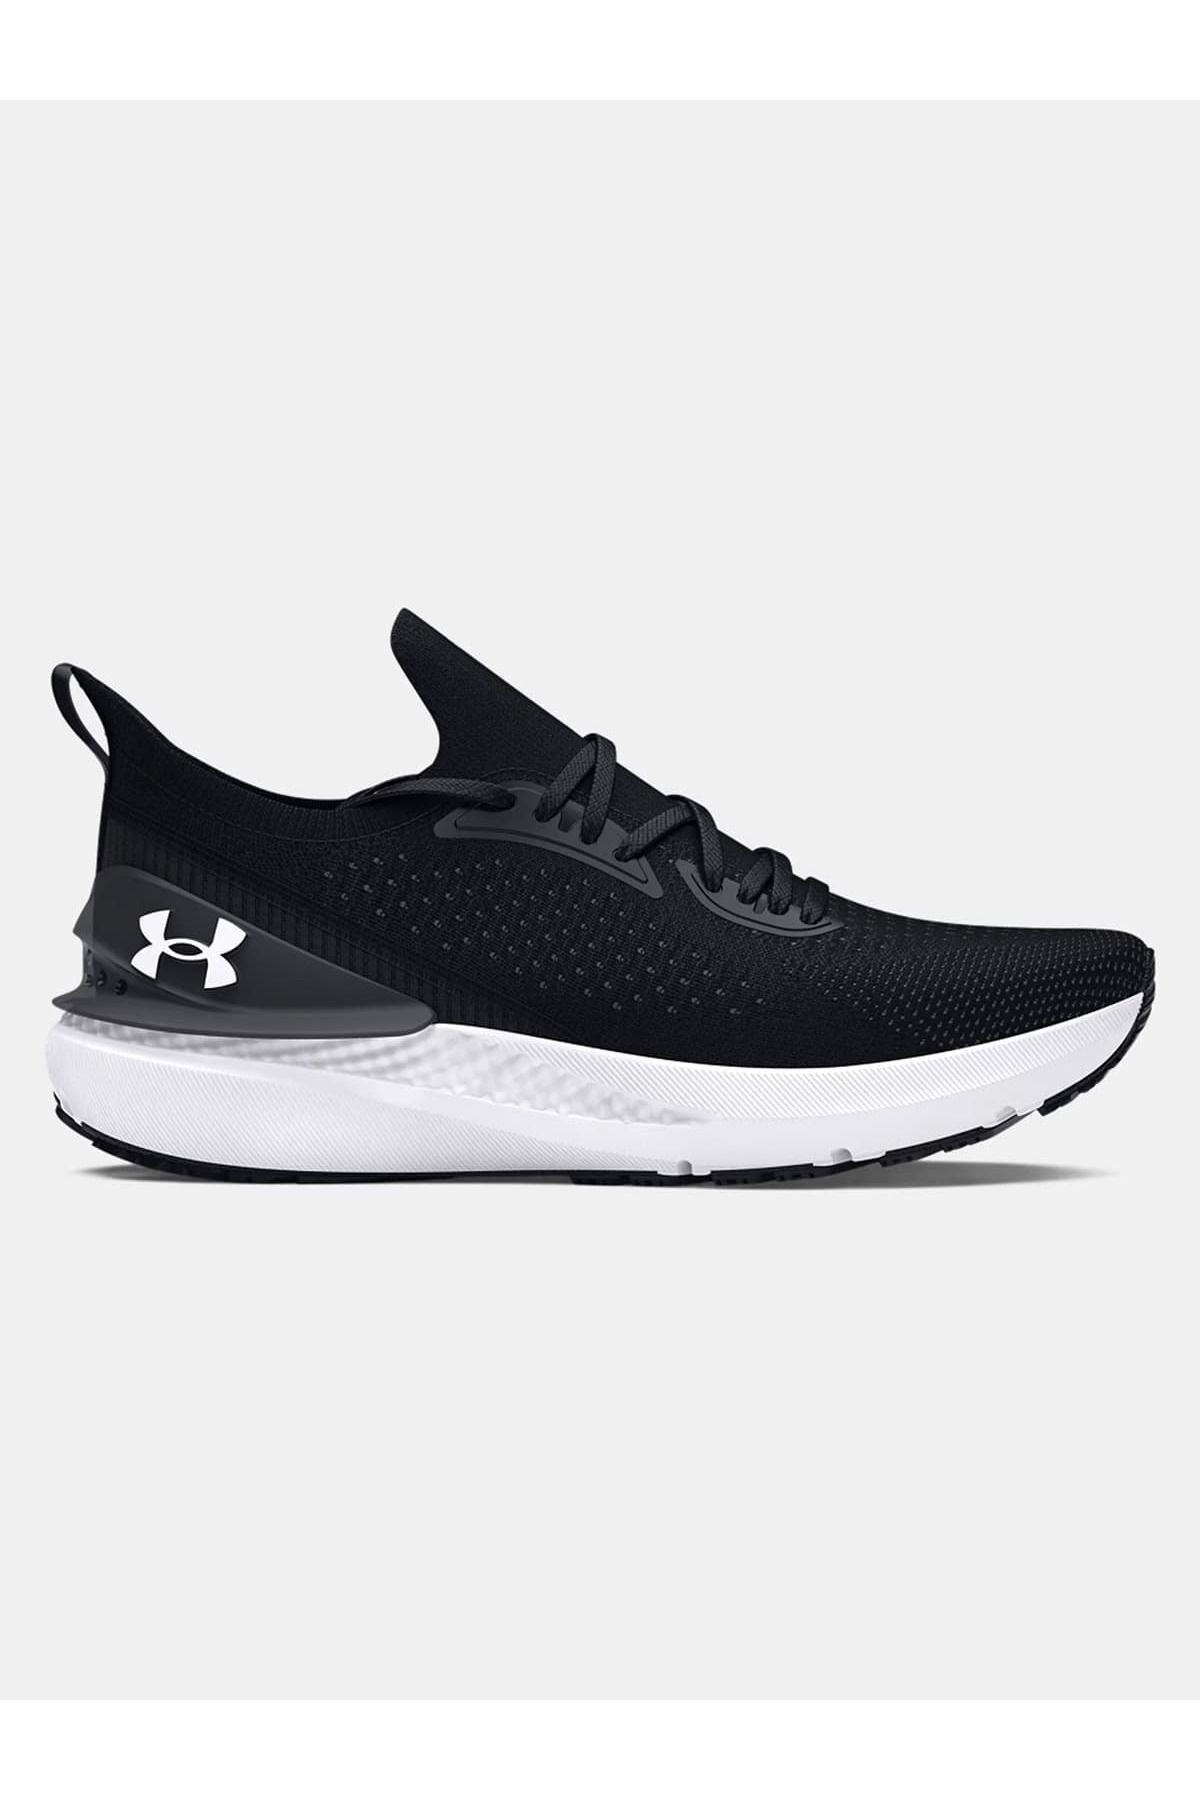 The Unparalleled Power of Under Armour Mens Shoes插图2